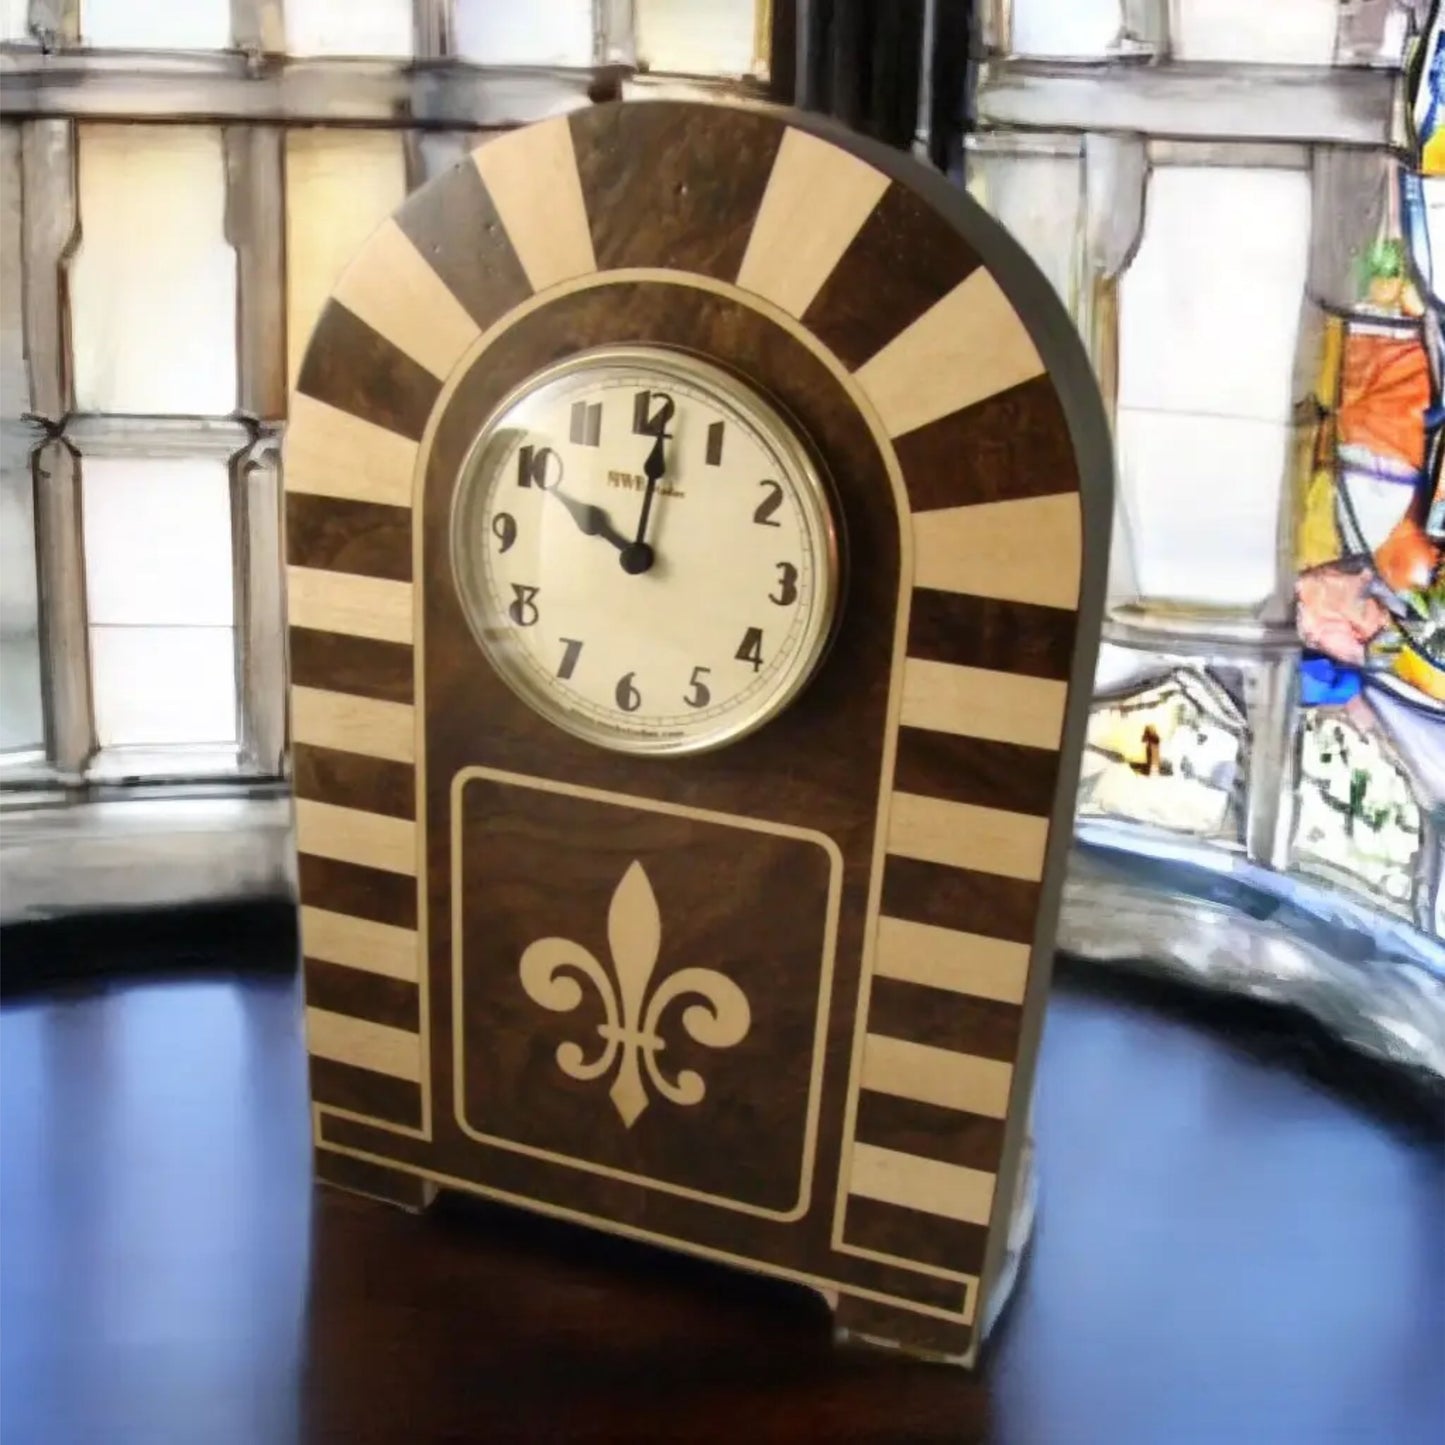 Handcrafted Mantle Clock - Art Deco with Inlaid Fleur-De-Lis  MC-34  Made in the U.S.